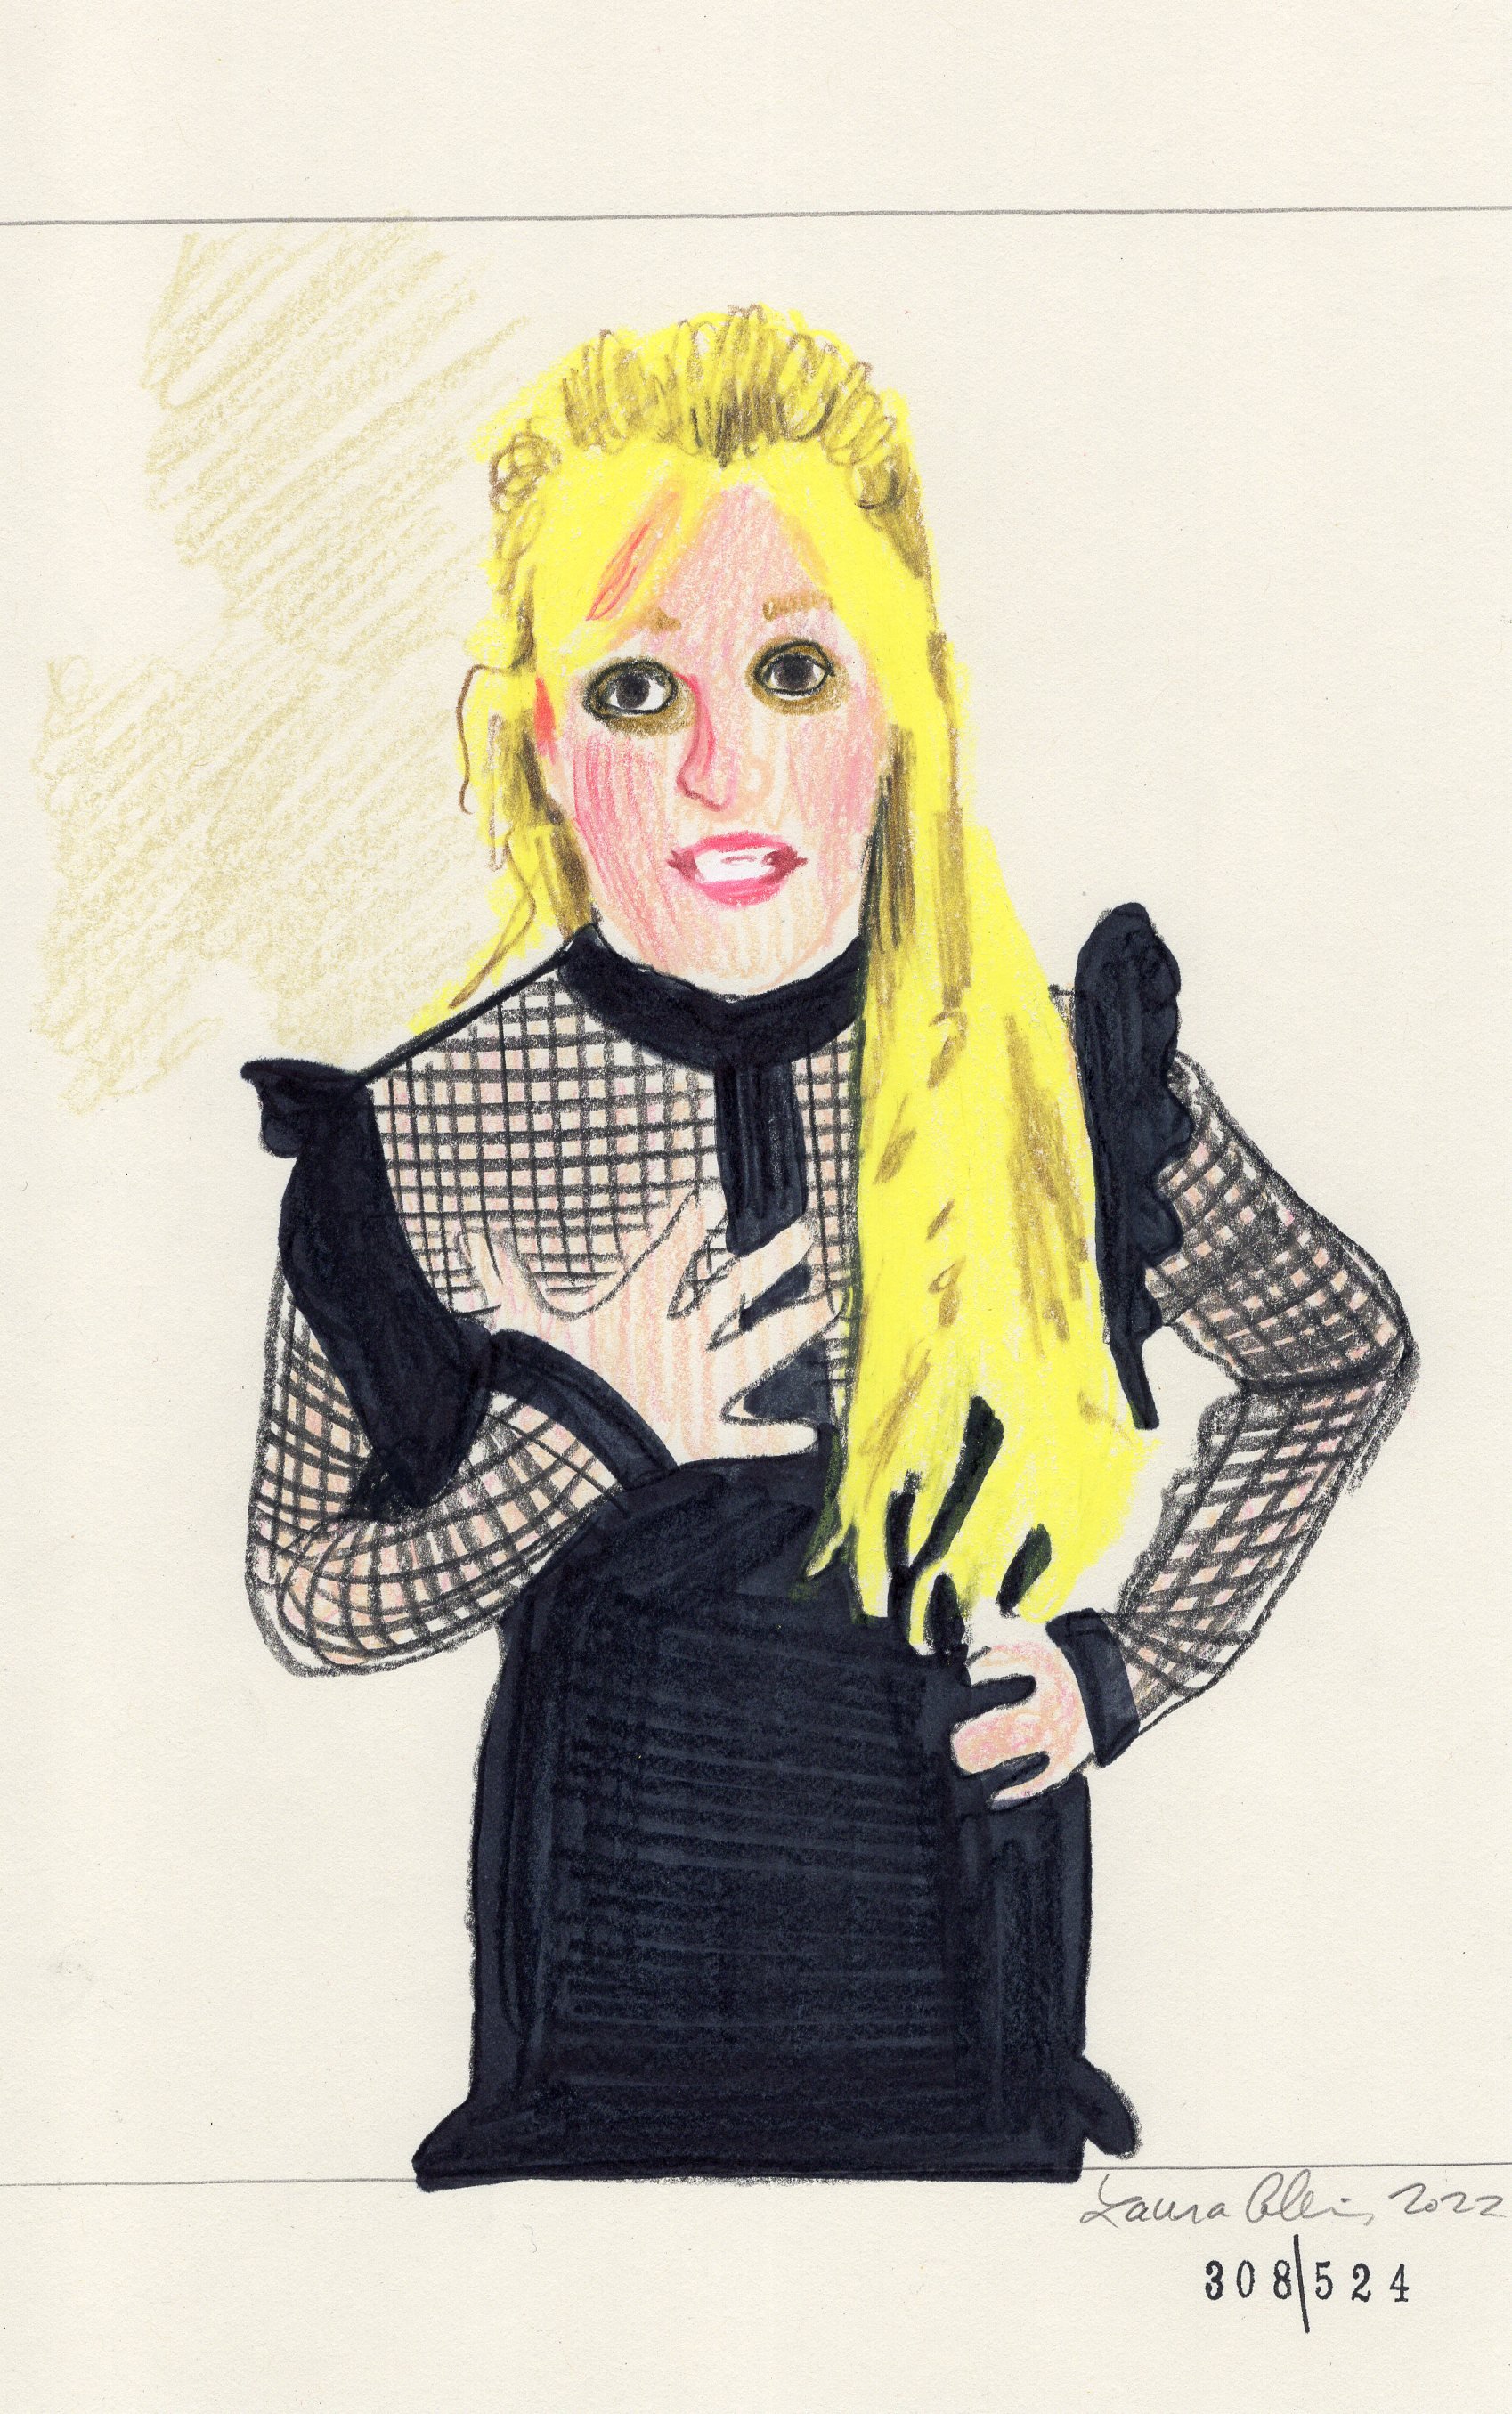 Laura Collins Britney Spears Animation 6x9in mixed media 2022 no308.jpg